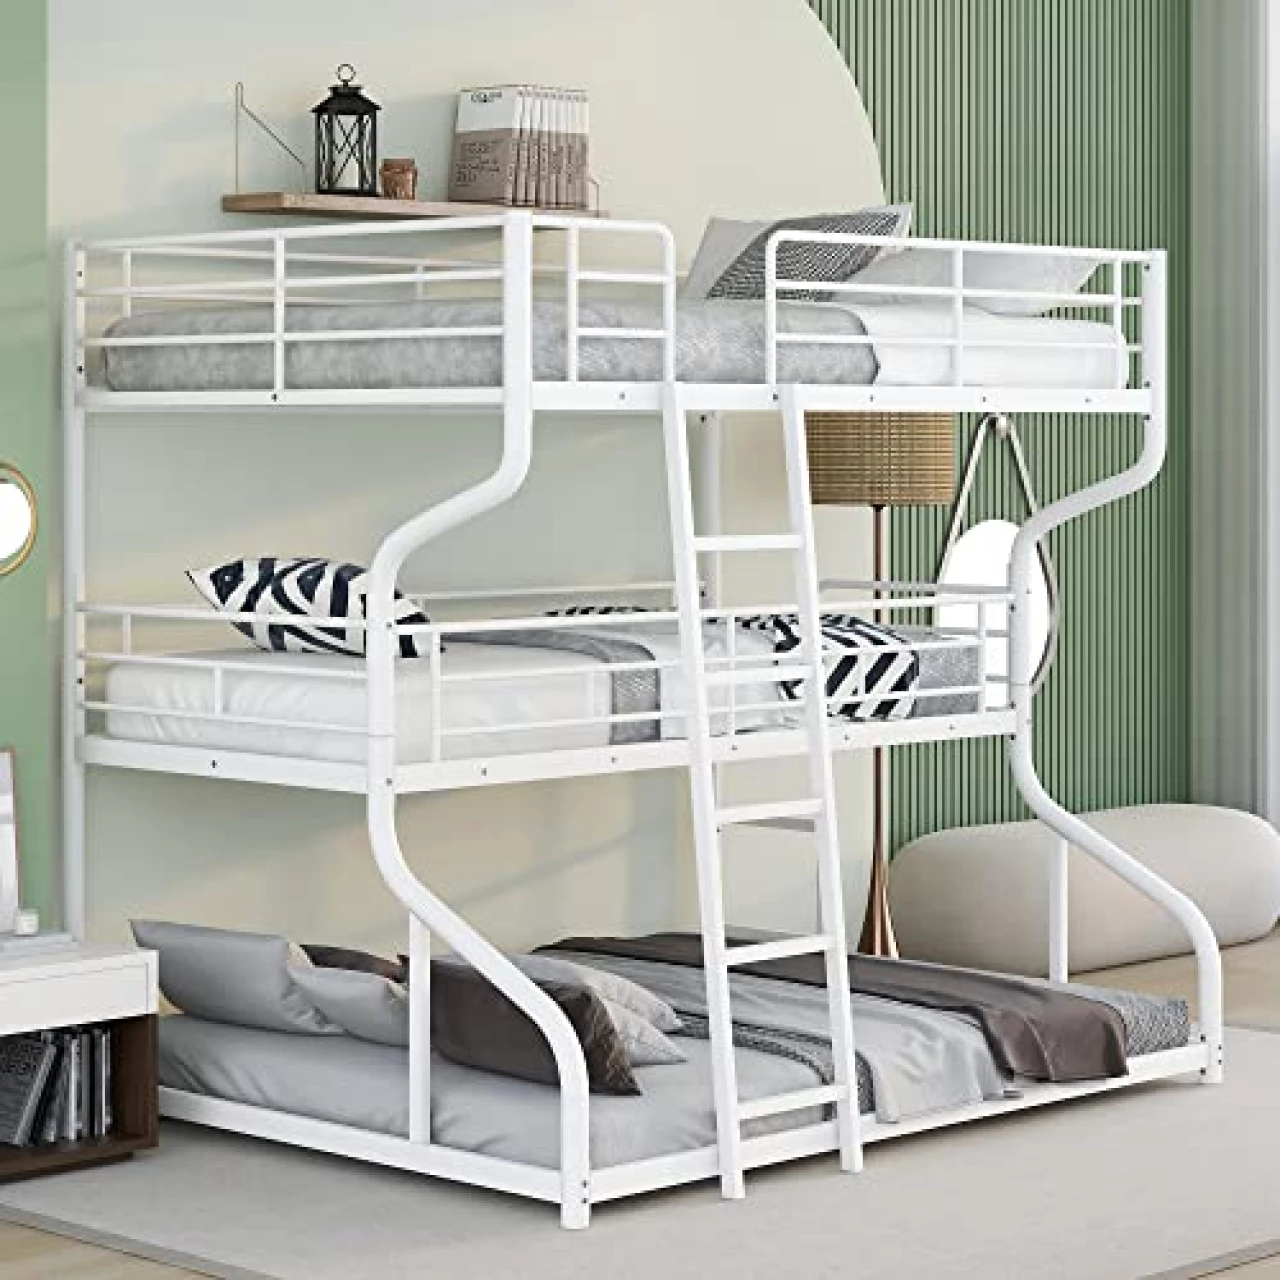 ManyStars Full Over Twin Over Queen Size Triple Bunk Bed with 2 Ladders, Bed Frame with Full-Length Guardrail for Kids Teens Girls Boys Bedroom, White